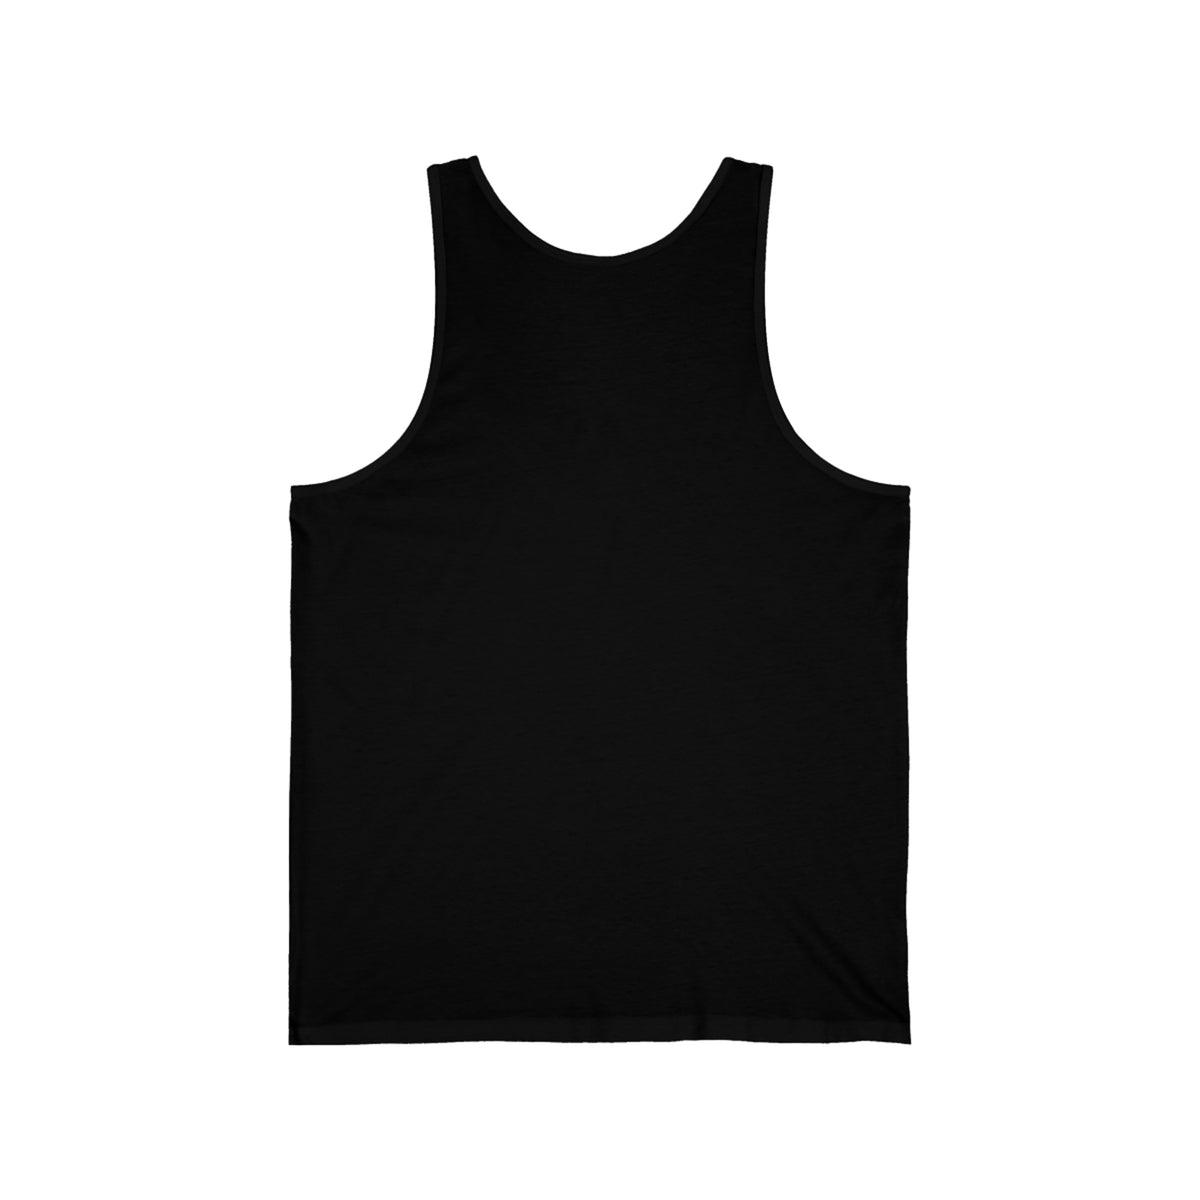 Bred In A Cage Unisex Jersey Tank